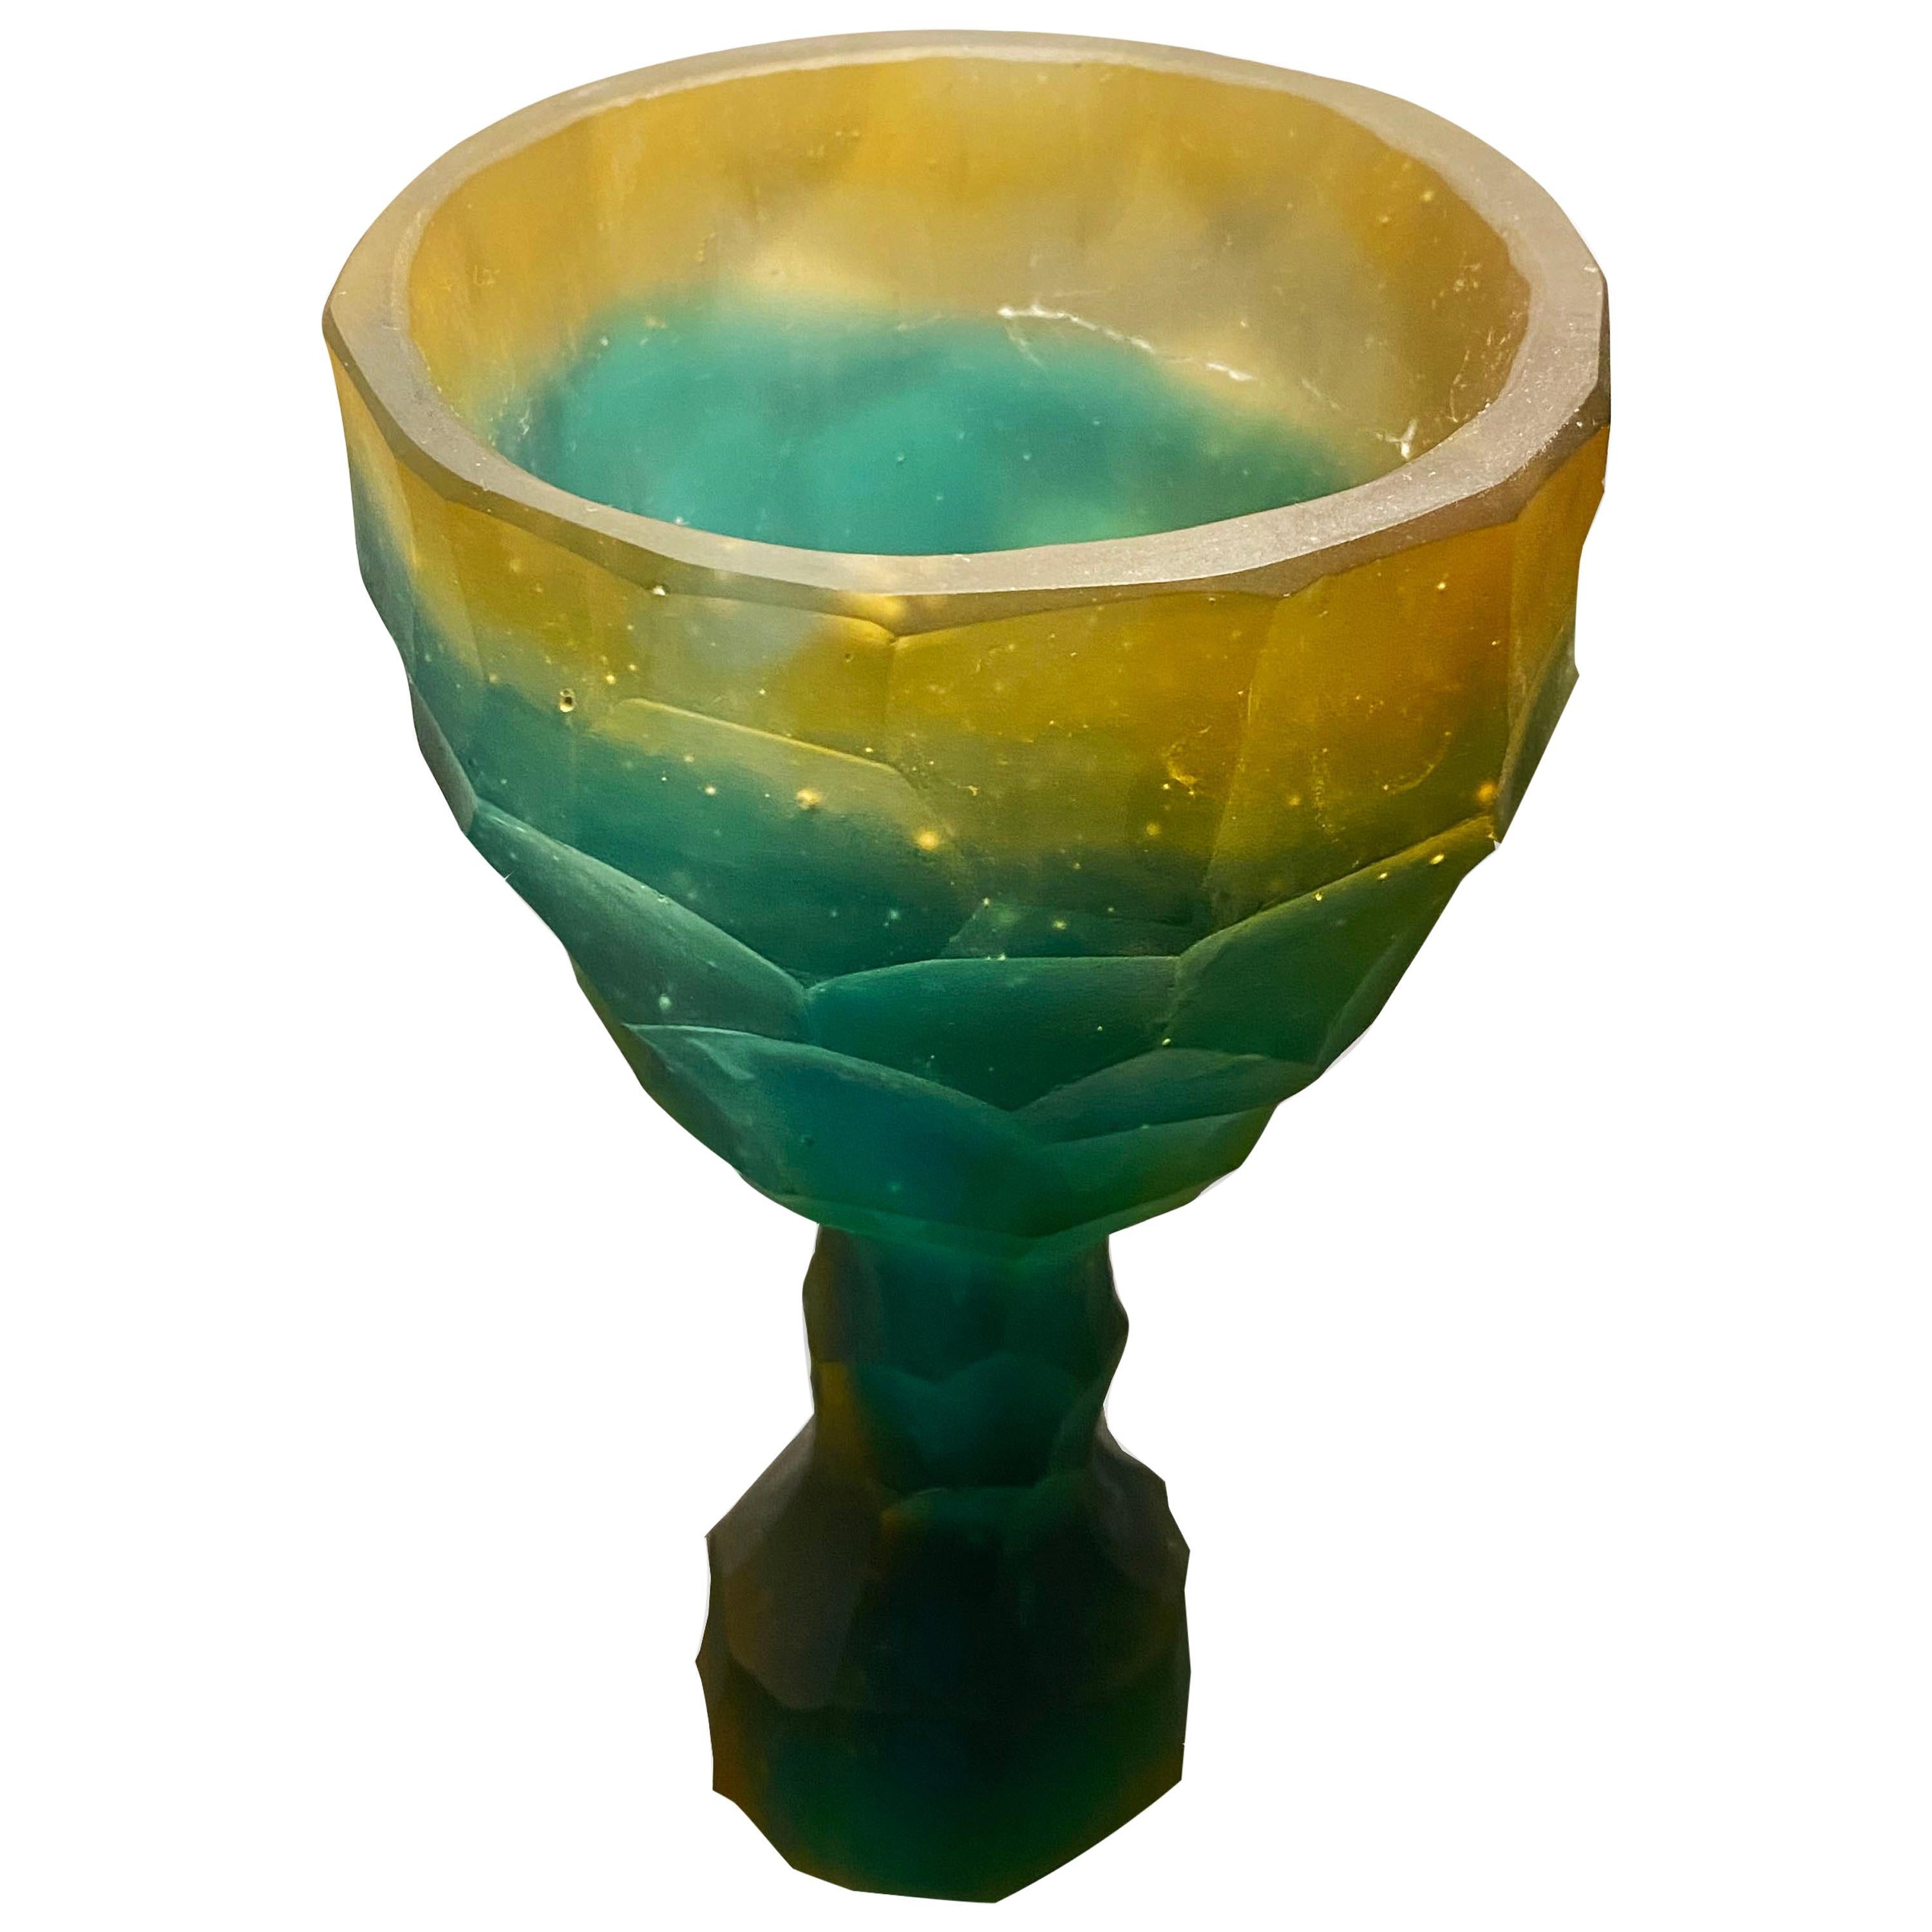 Green and Orange Hand-Sculpted Crystal Glass by Alissa Volchkova